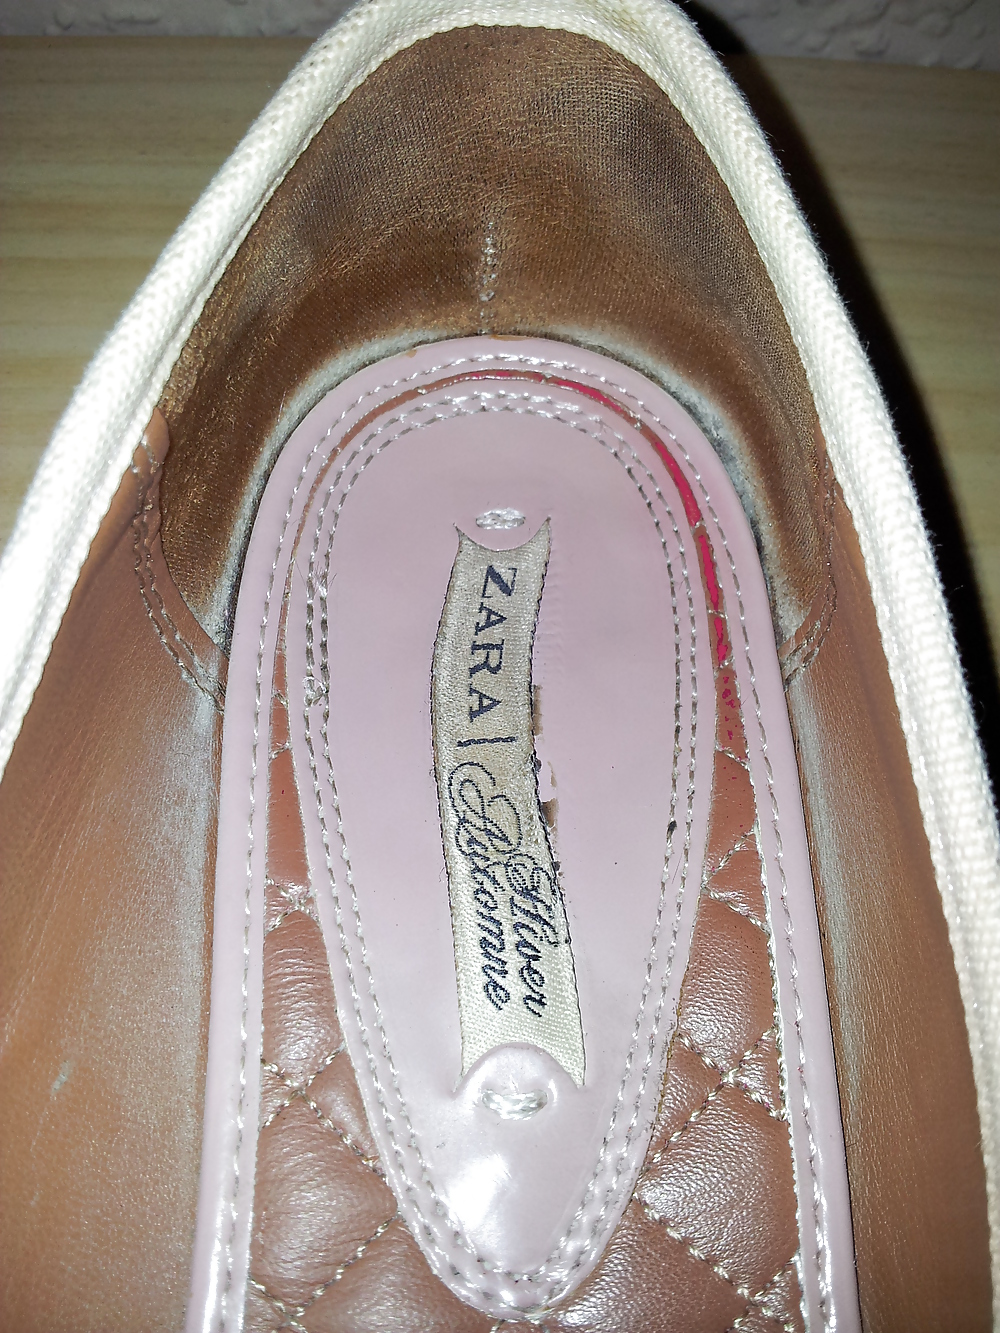 Wifes well worn nude lack Ballerinas flats shoes2 #19093415